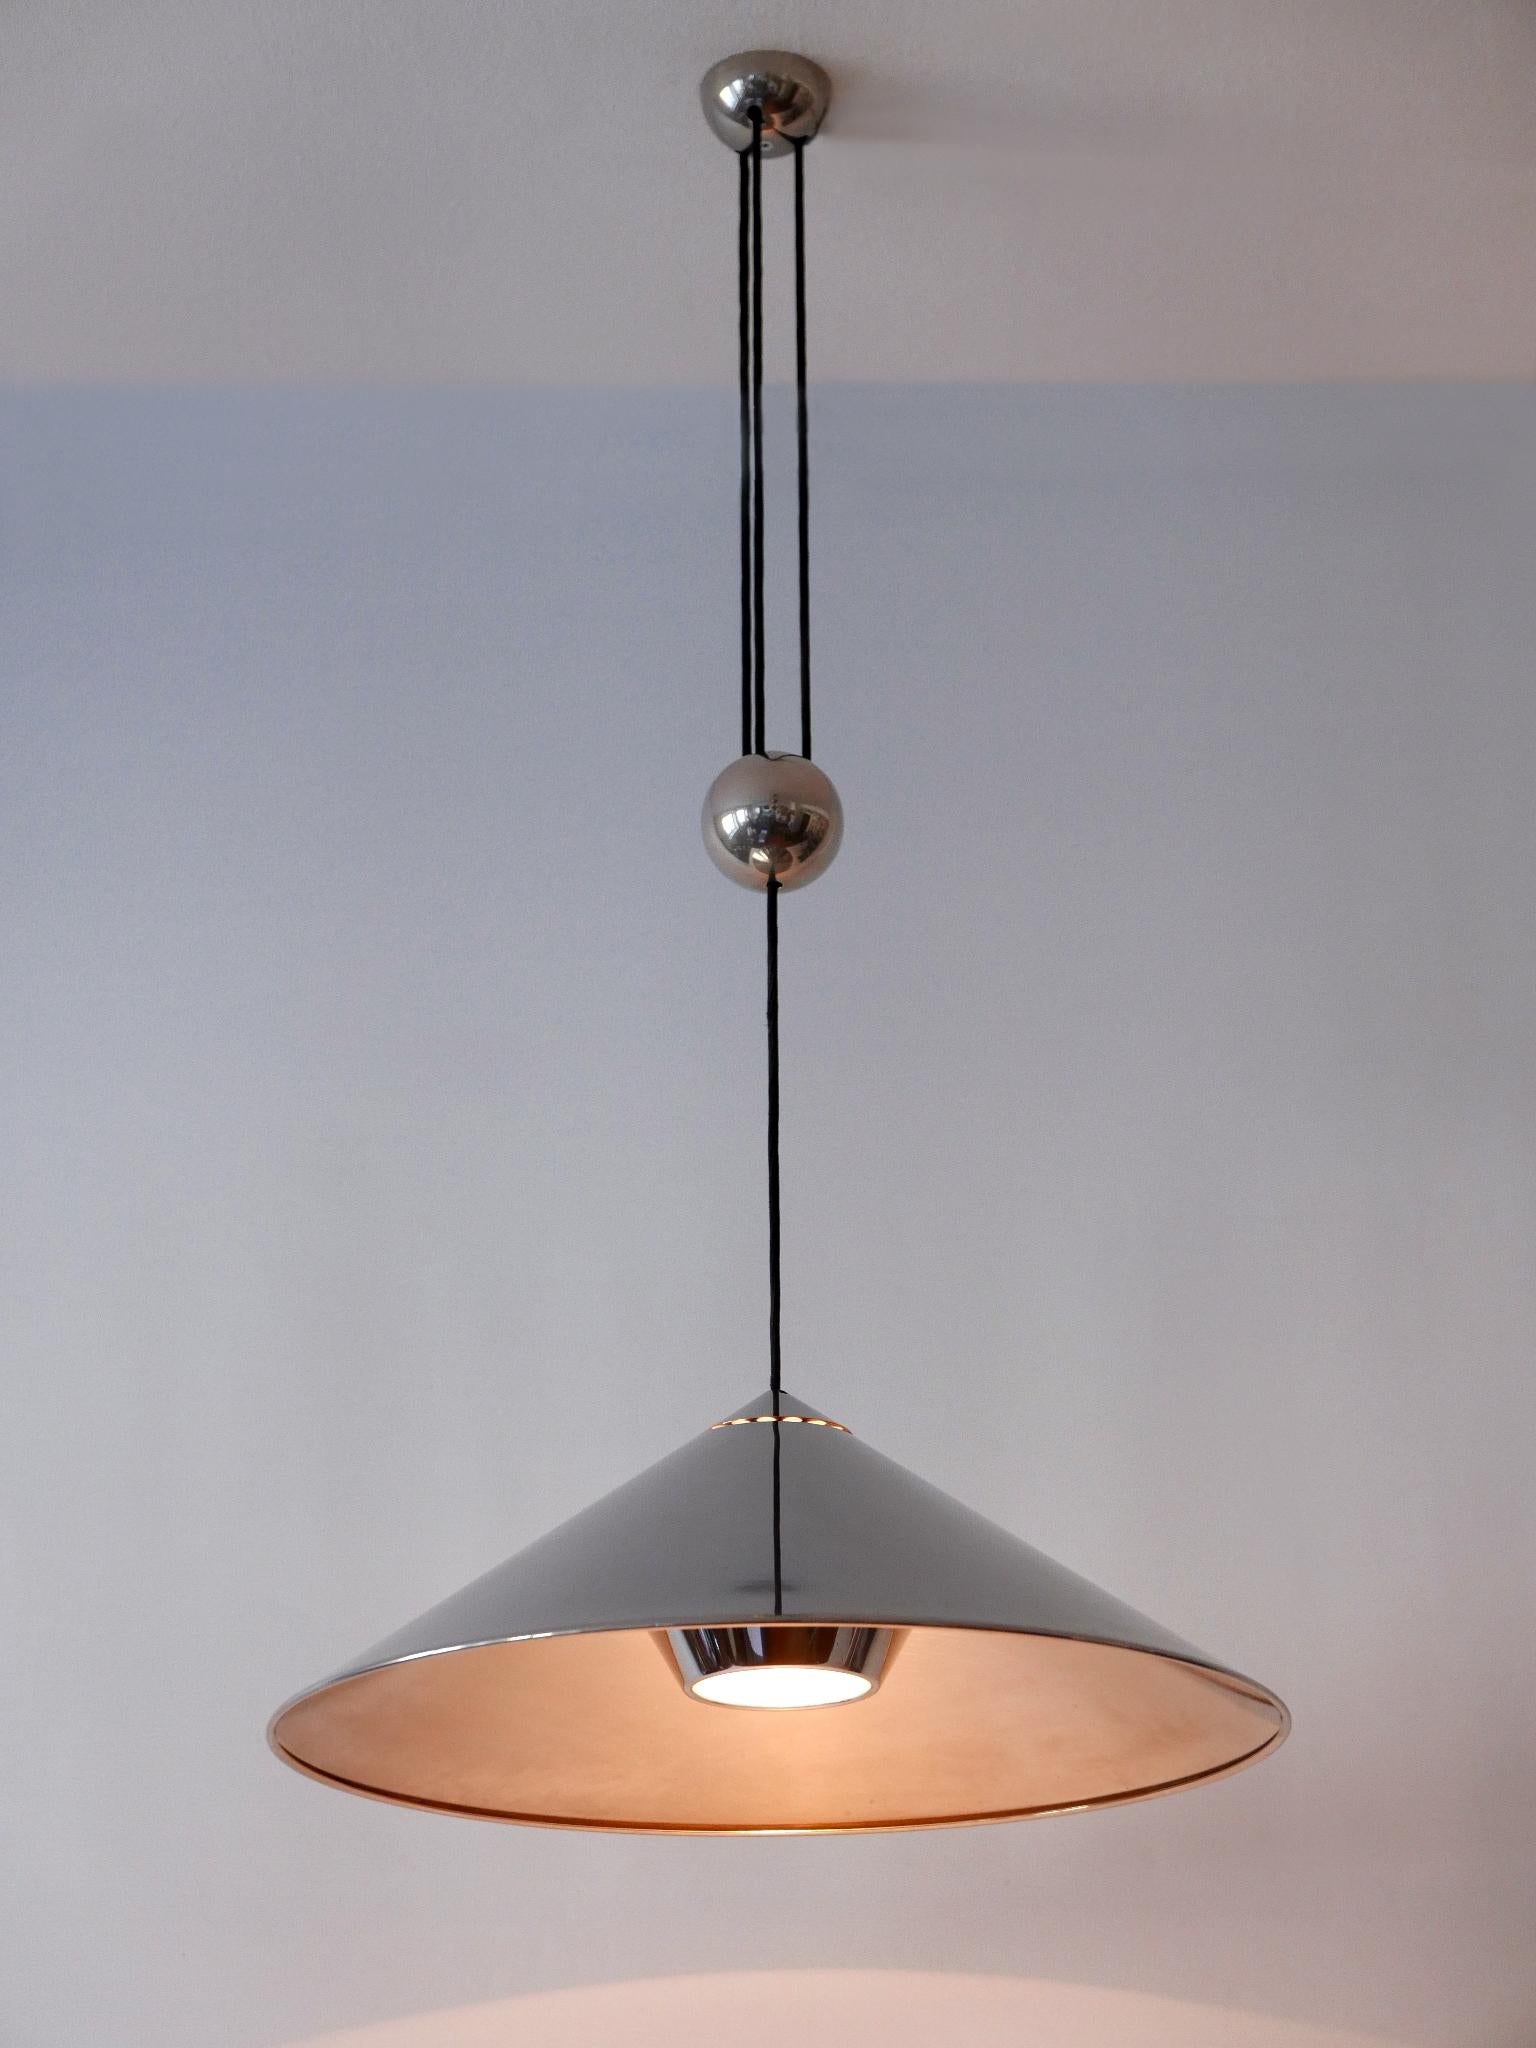 Adjustable Counterweight Pendant Lamp Keos by Florian Schulz Germany 1970s For Sale 2